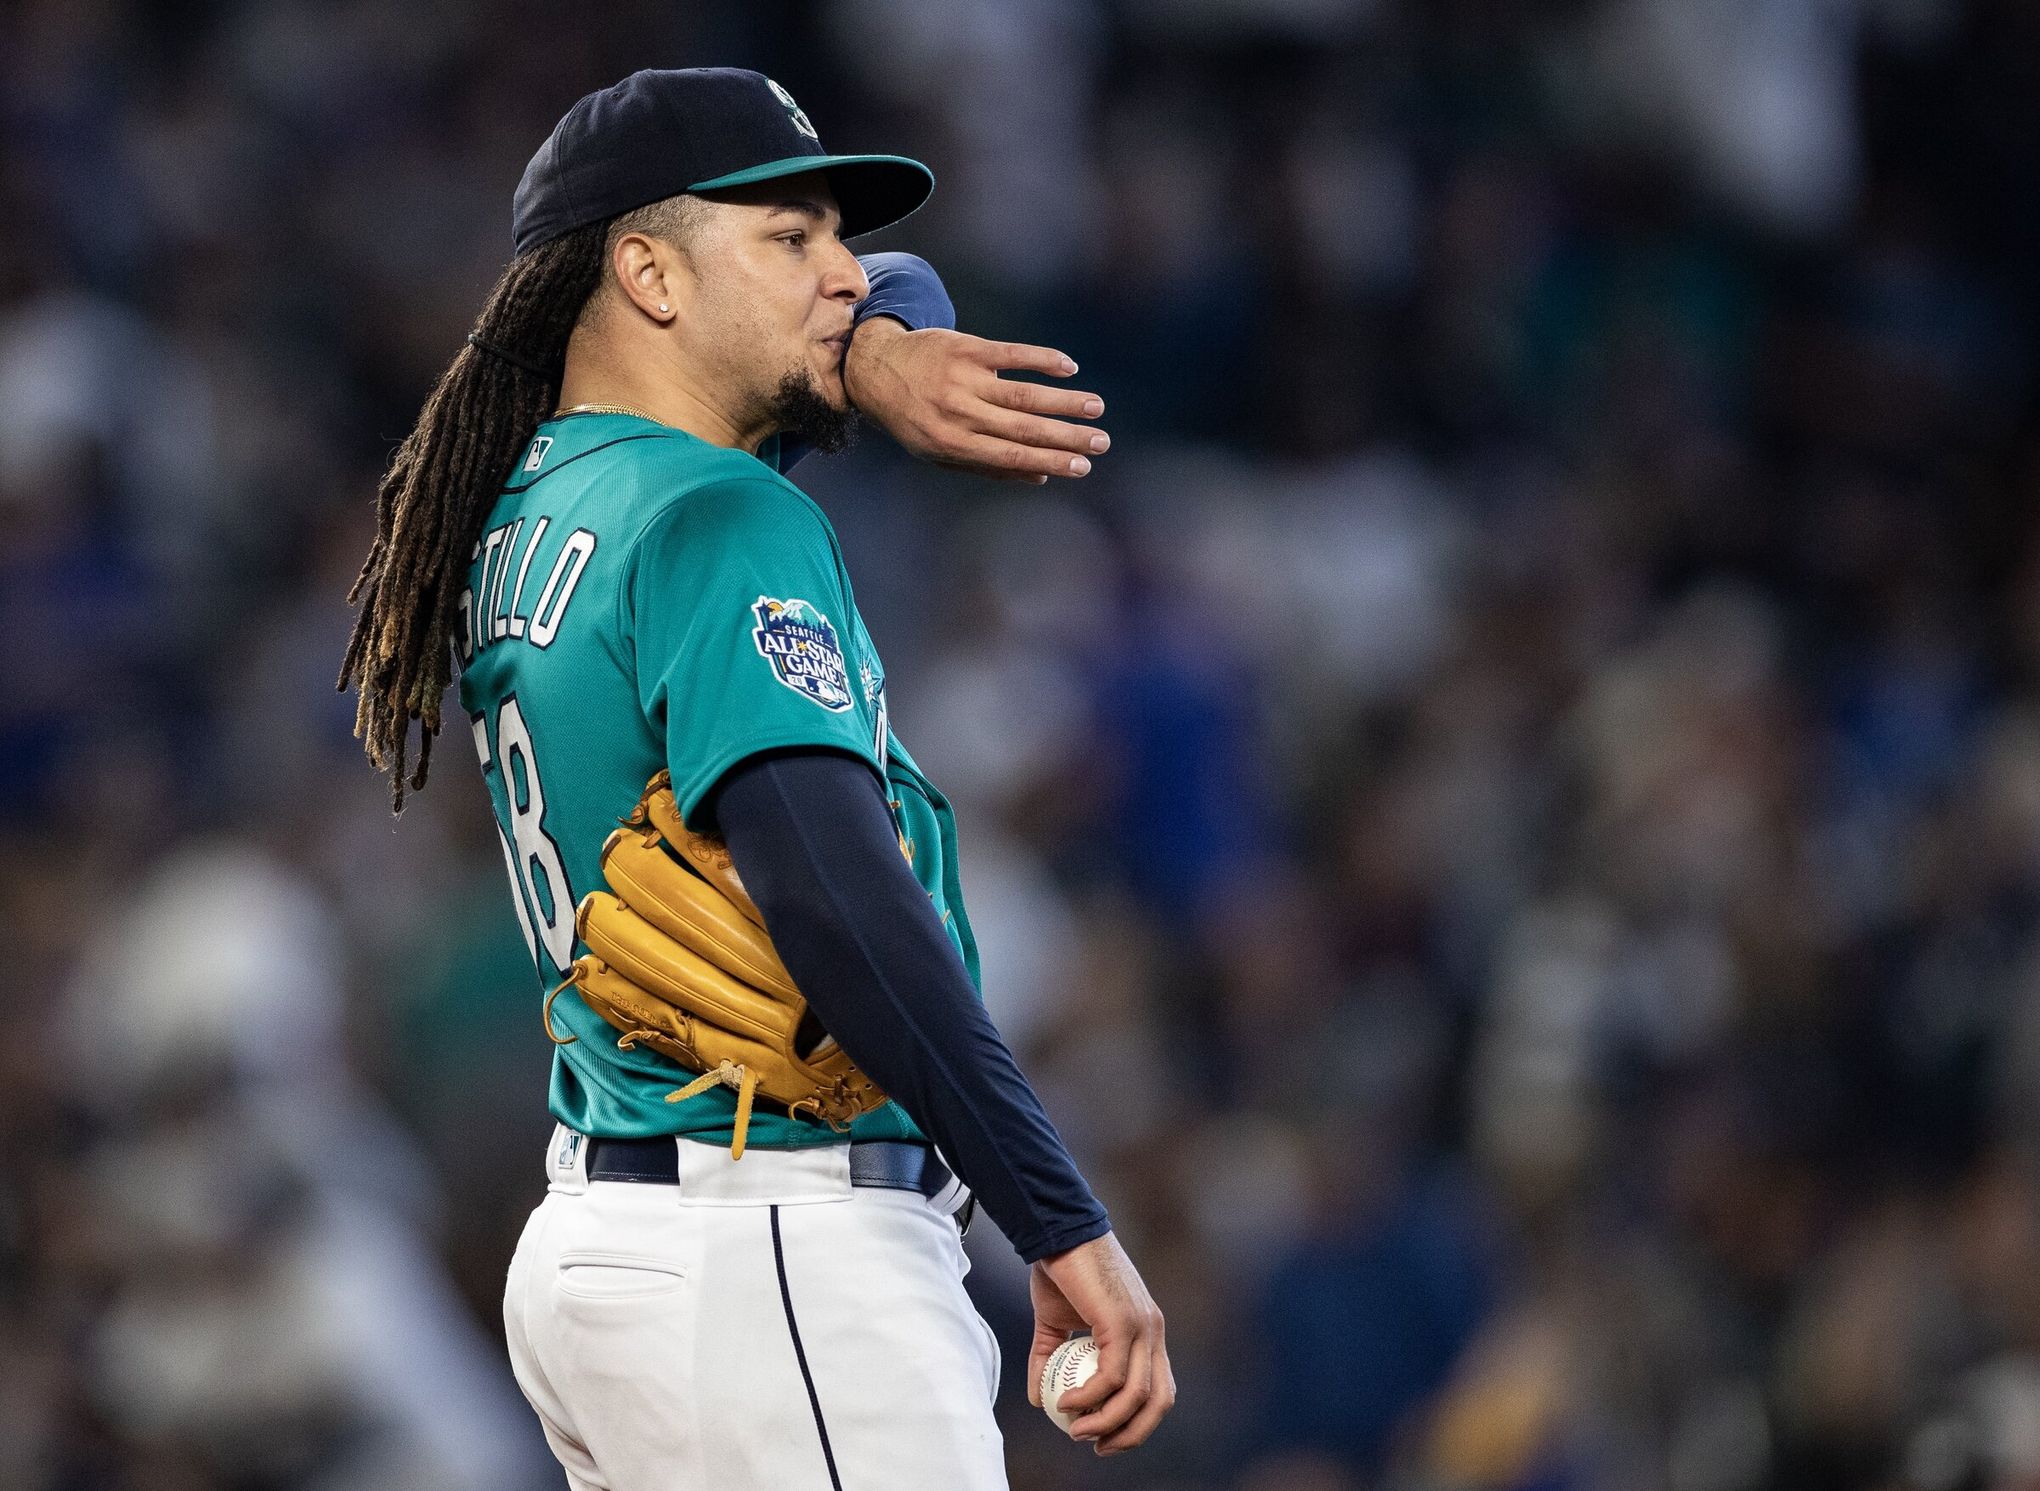 Getting to the bottom of how the Mariners' Cal Raleigh got the